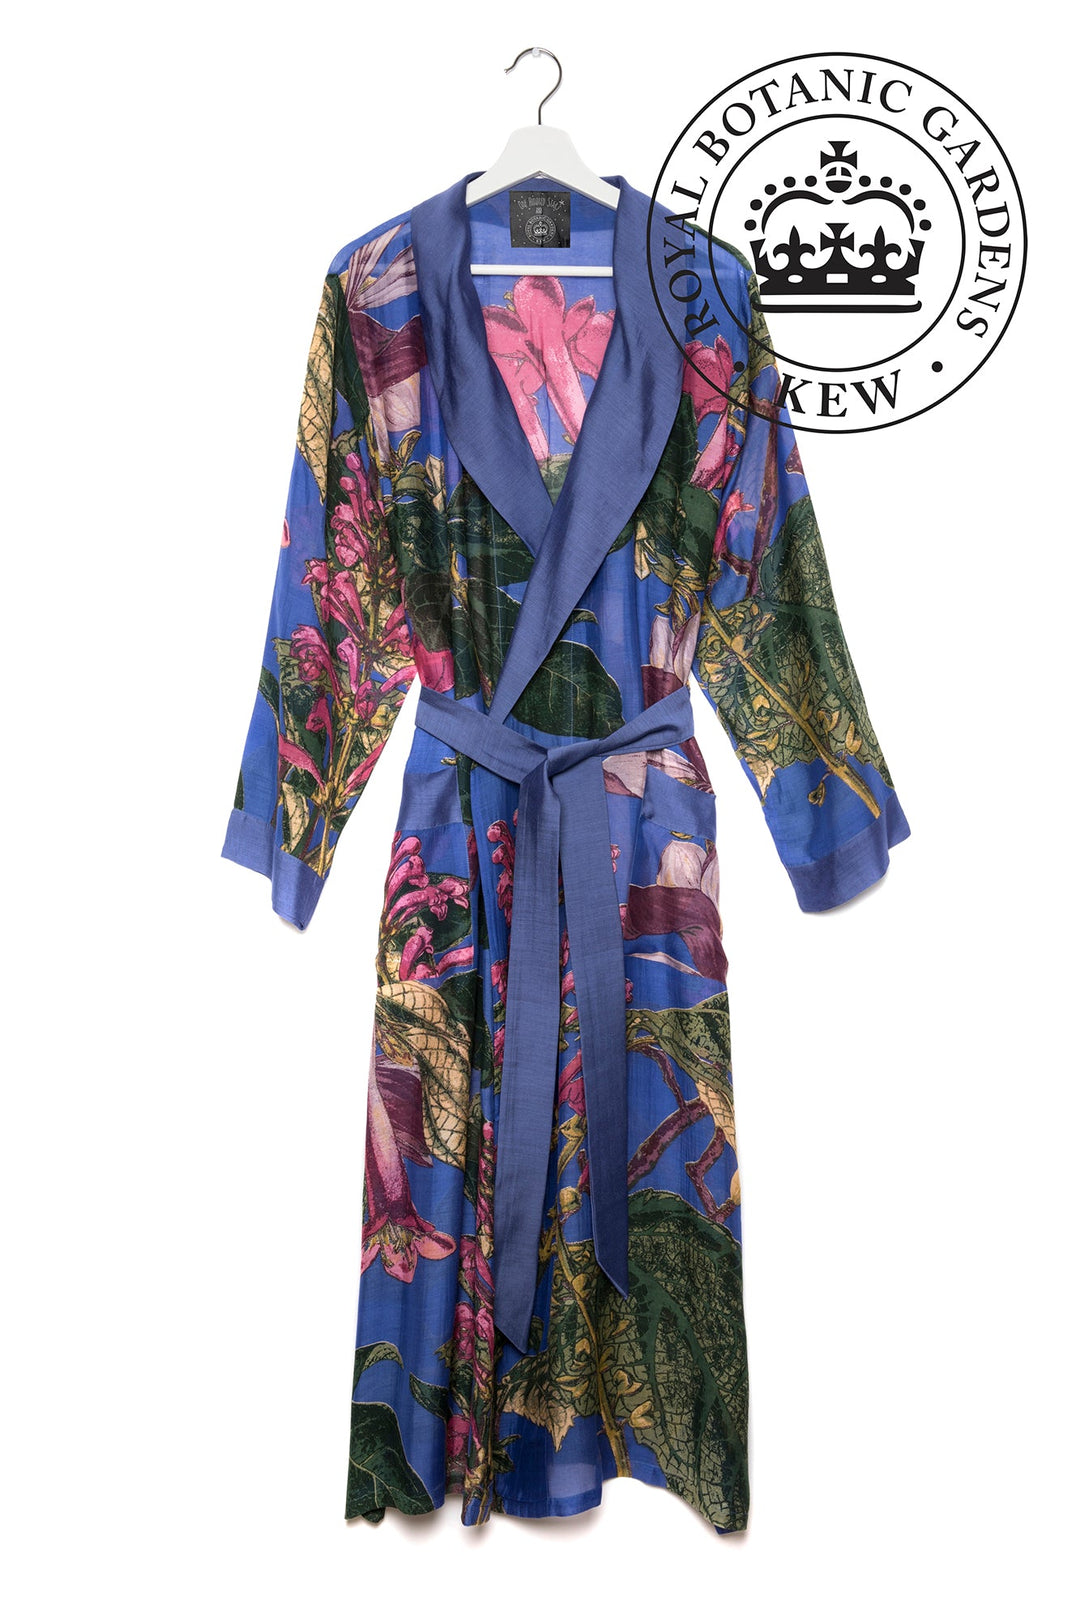 KEW Magnolia Purple Gown- This gown is perfect as a luxurious house coat or for layering as a chic accessory to your favourite outfit.